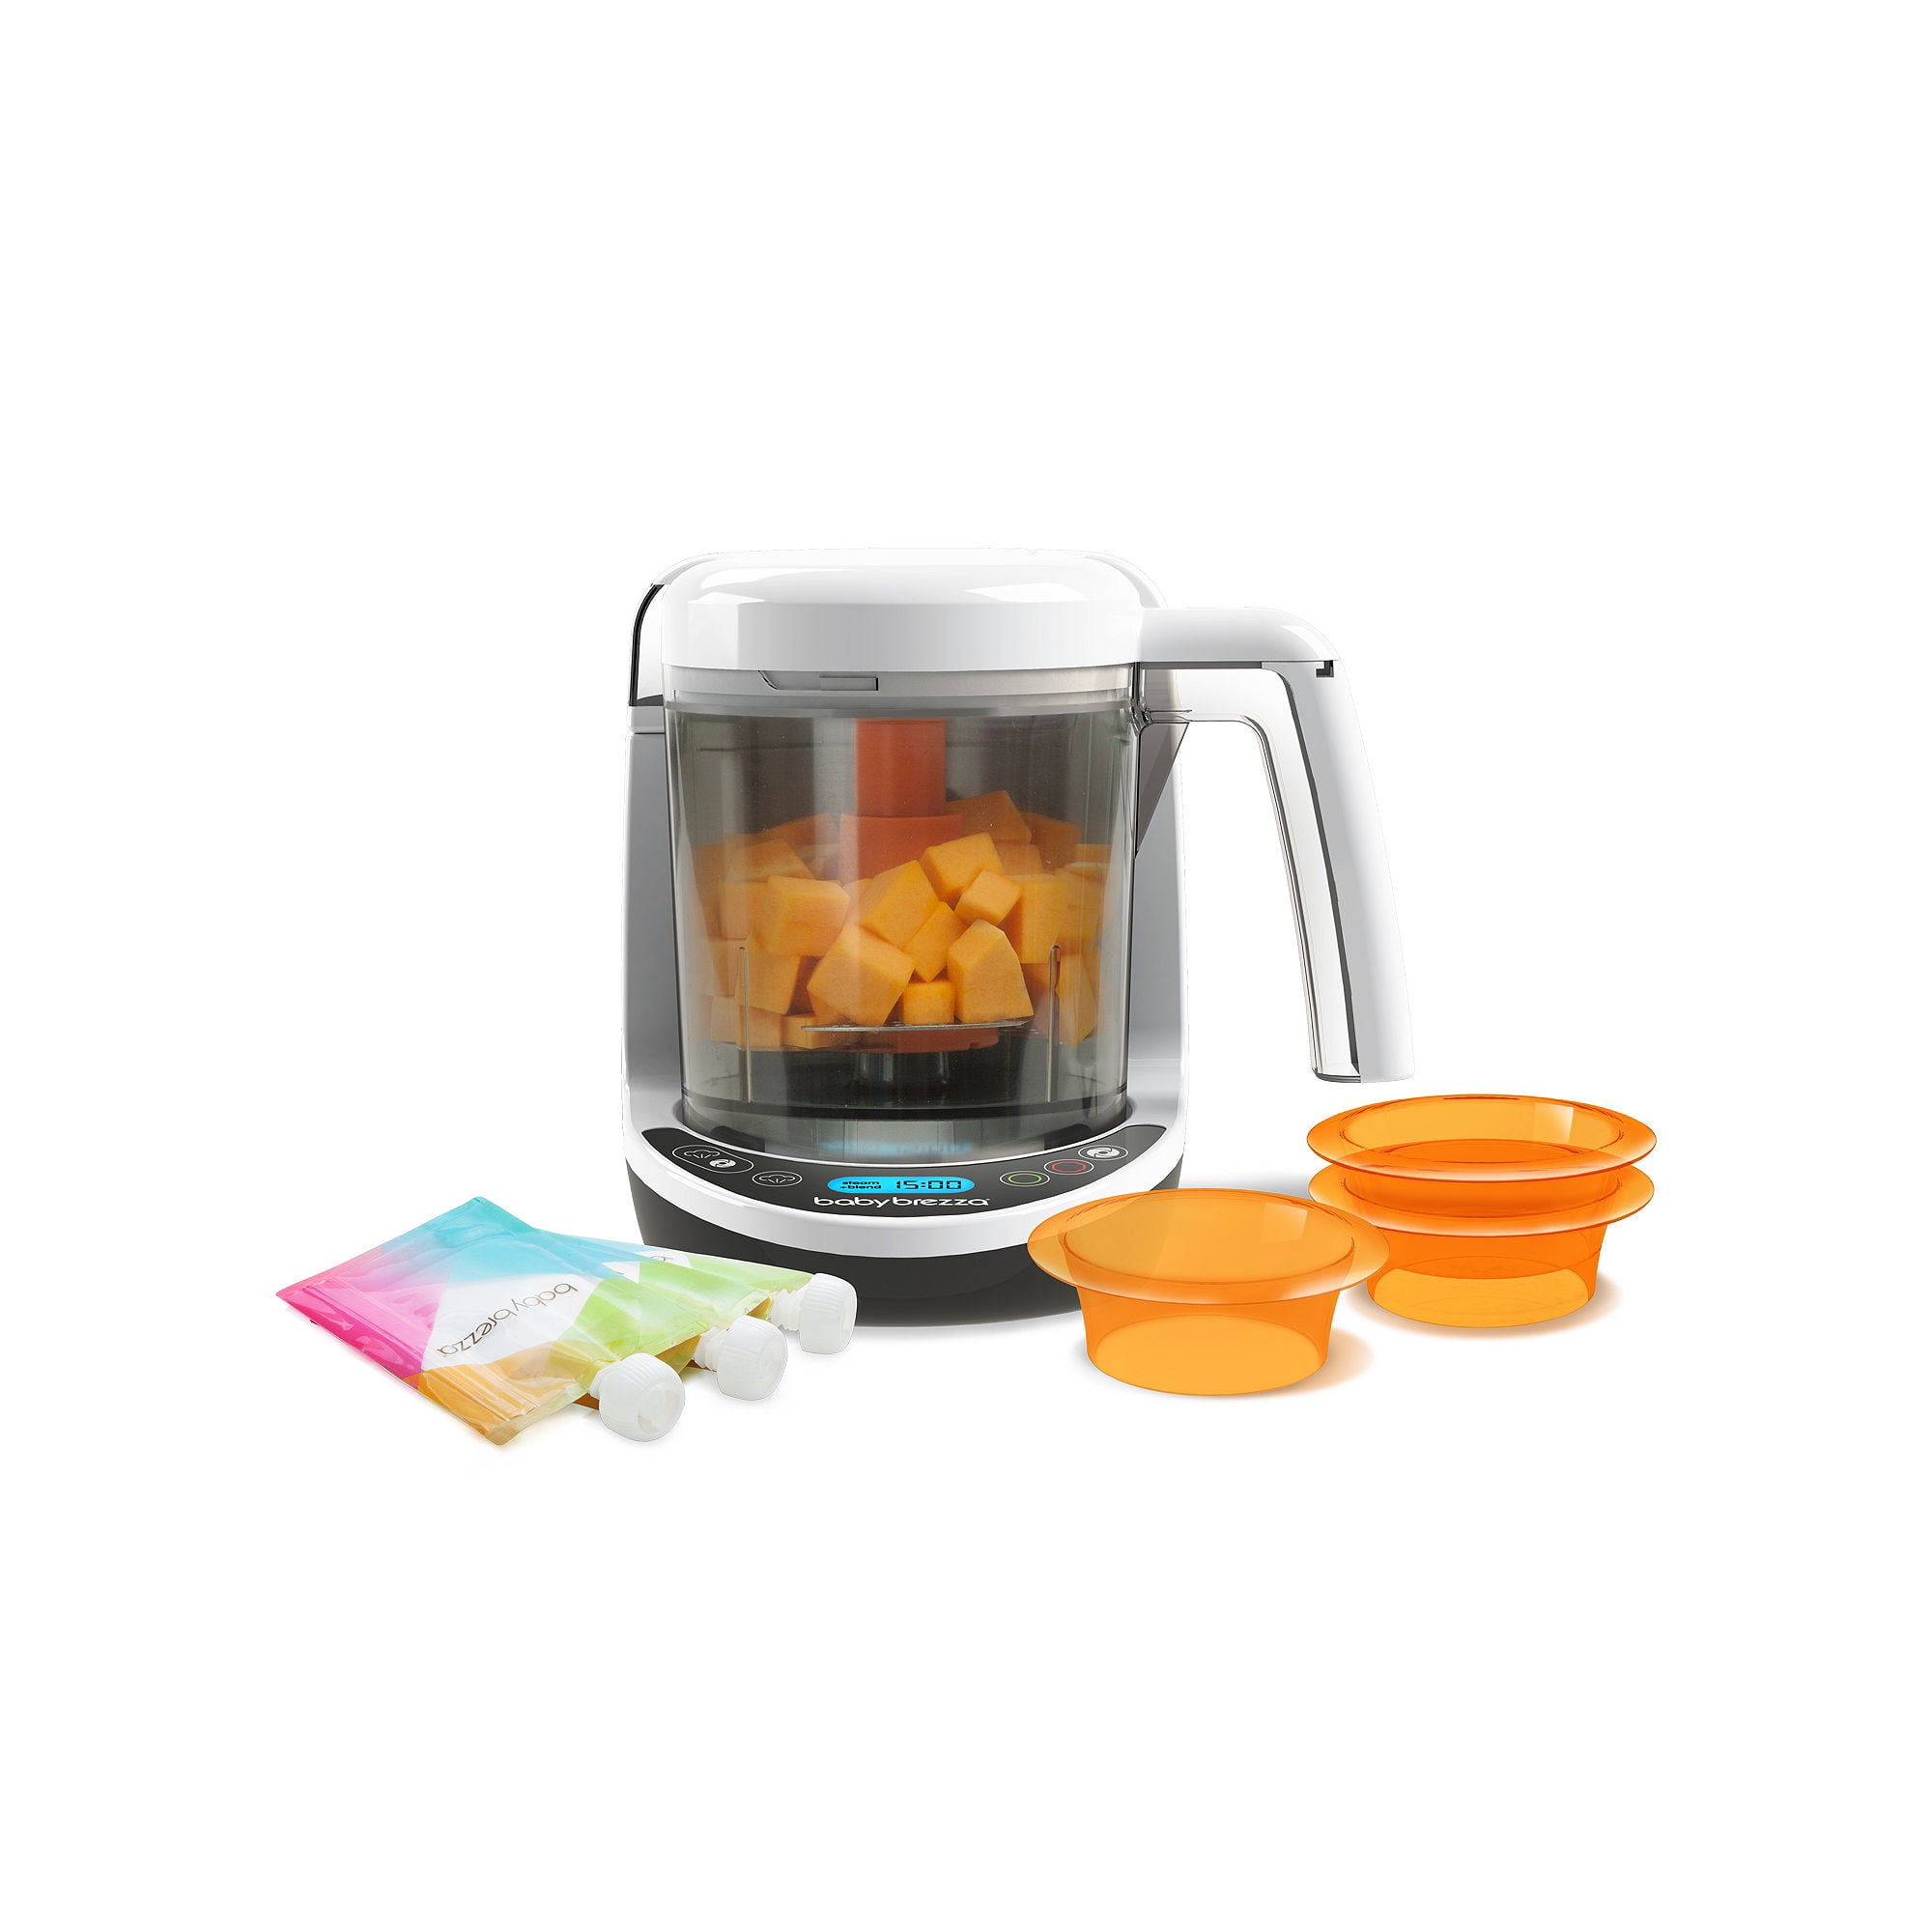 Baby Brezza One Step Baby Food Maker - Deluxe » Fast Shipping